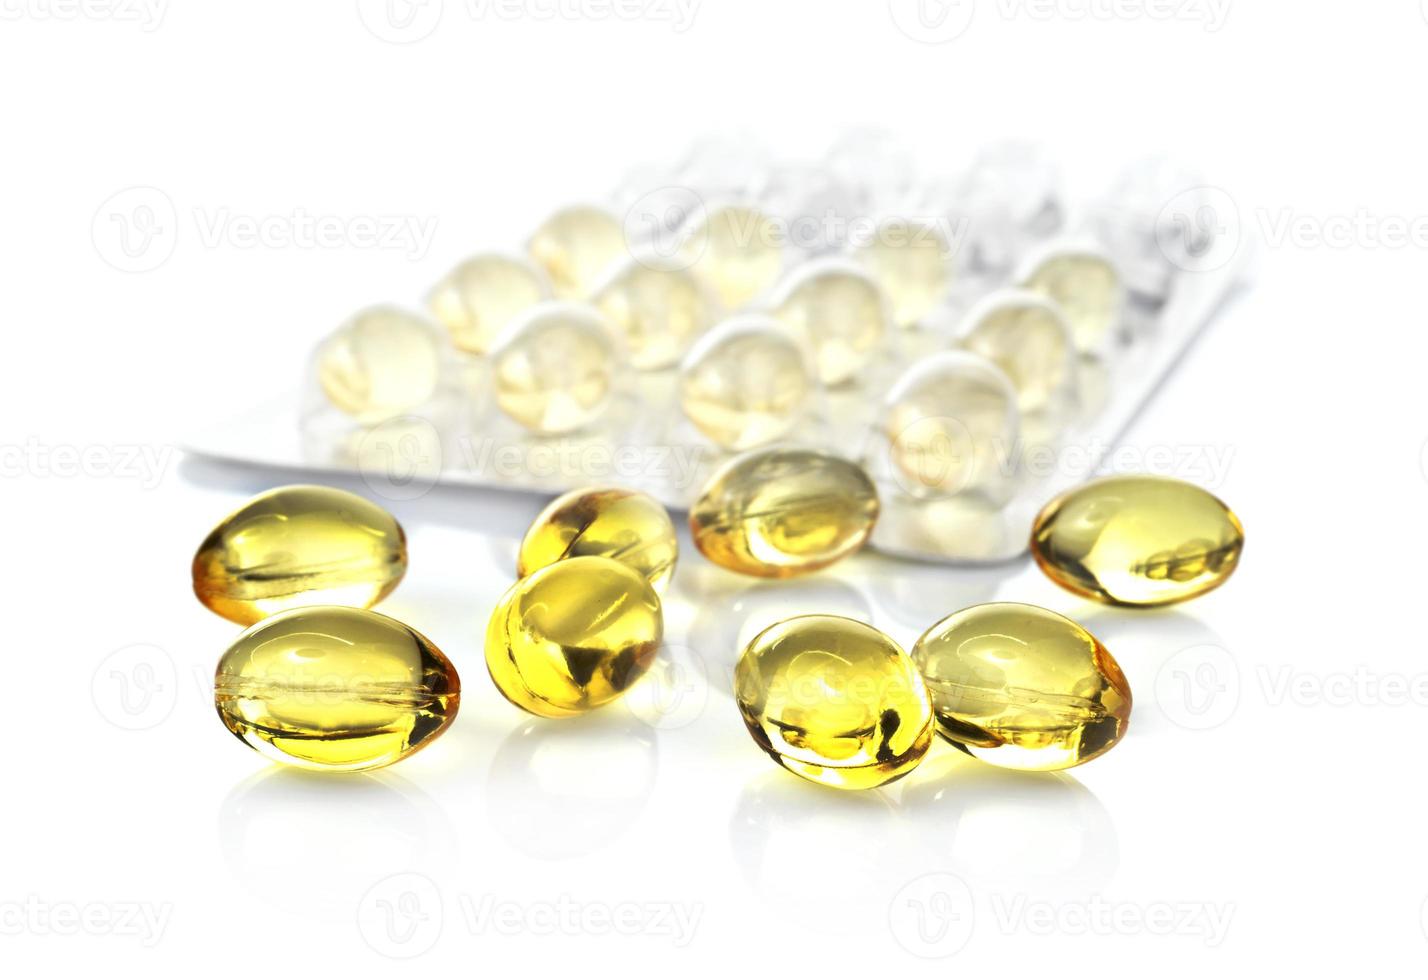 fish oil capsules and blister pack isolated on white background photo